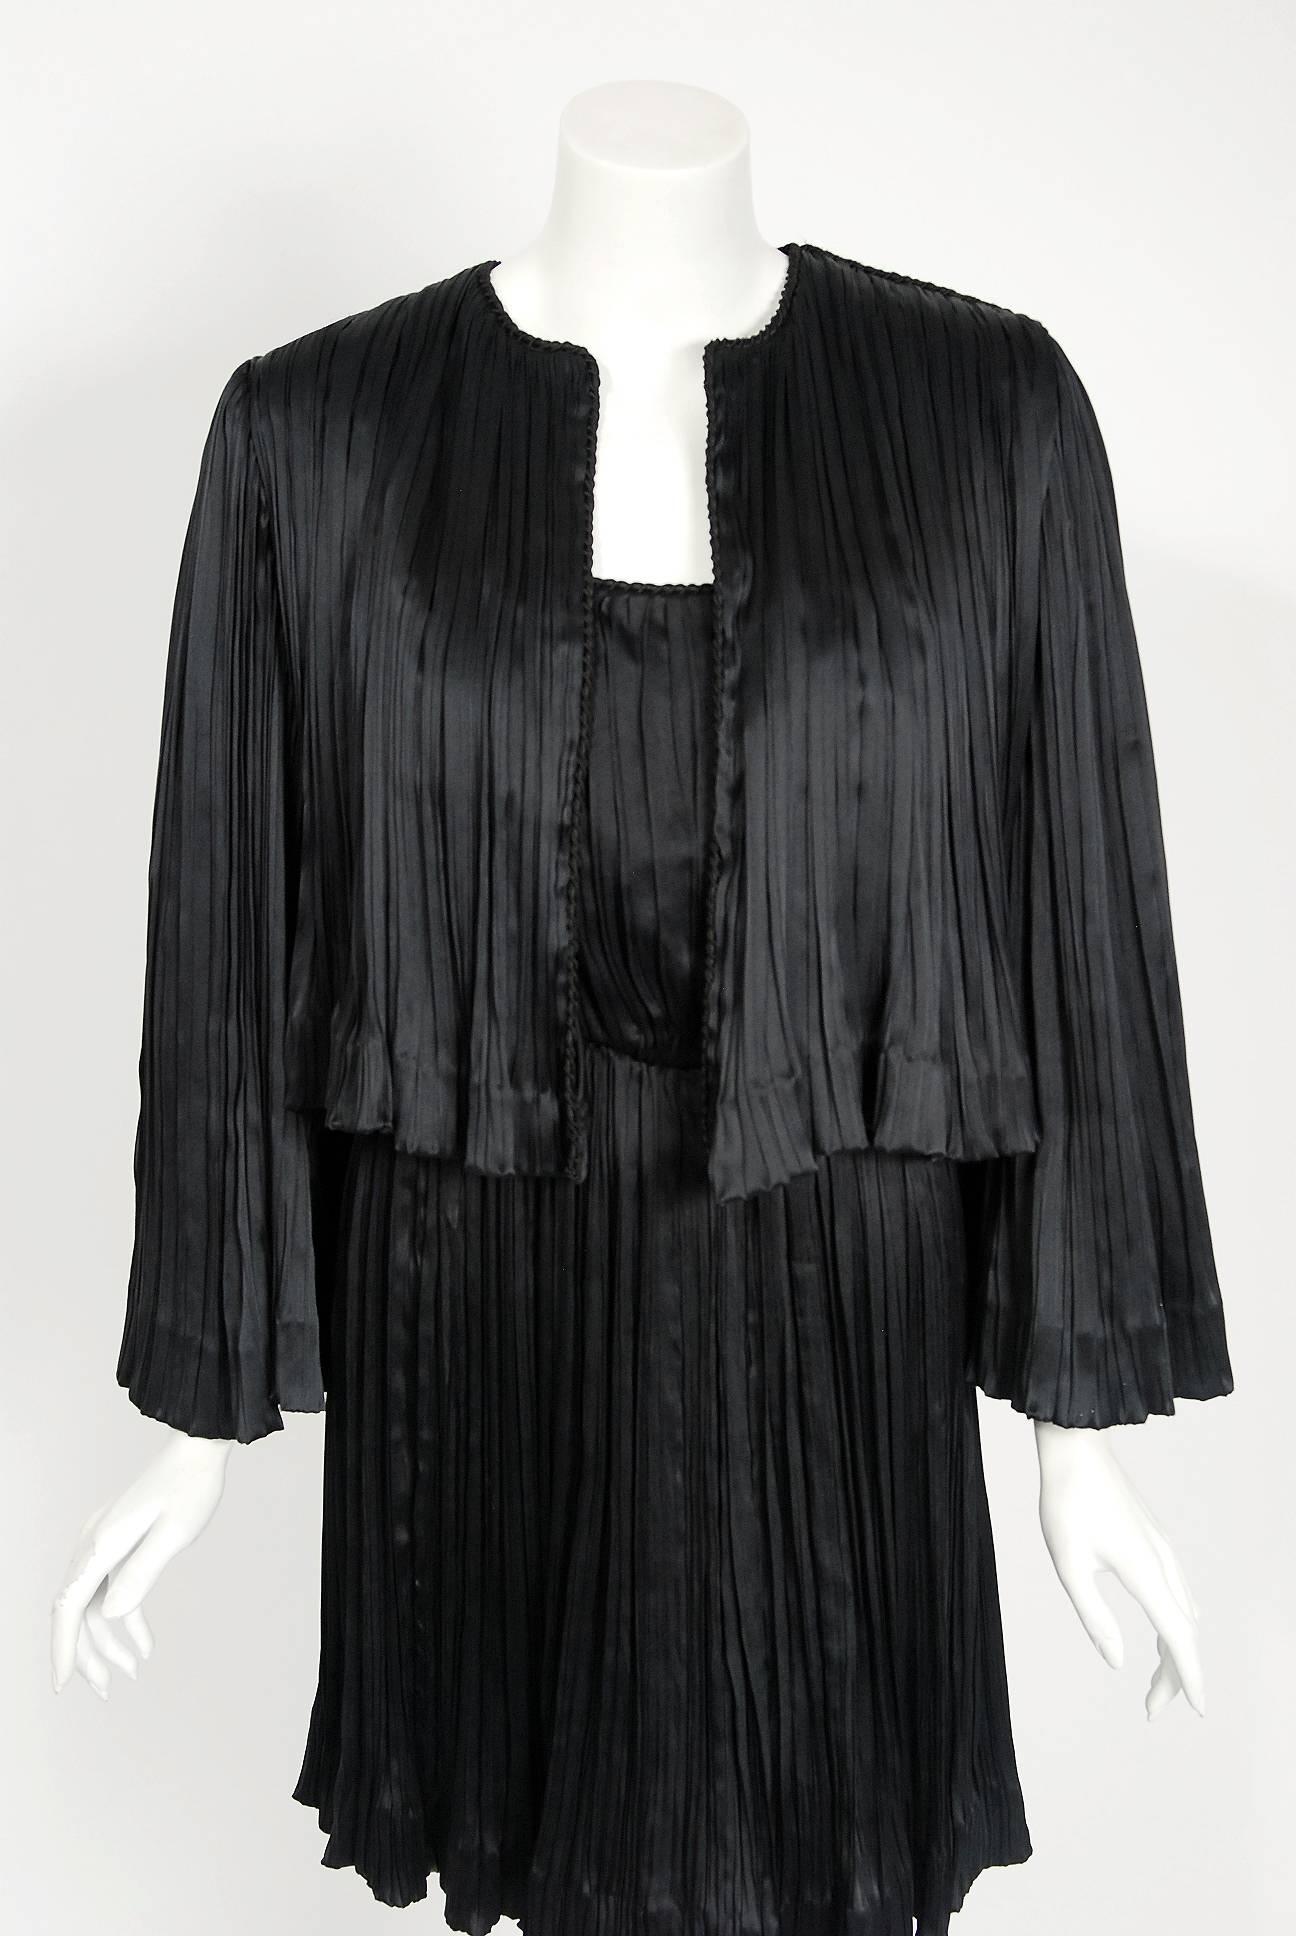 Chanel is known to be one of the most luxurious and decadent fashion houses in the world. This breathtaking black fortuny-pleated silk cocktail dress ensemble from 1977 is a perfect example of why this couture brand has stood the test of time. Not